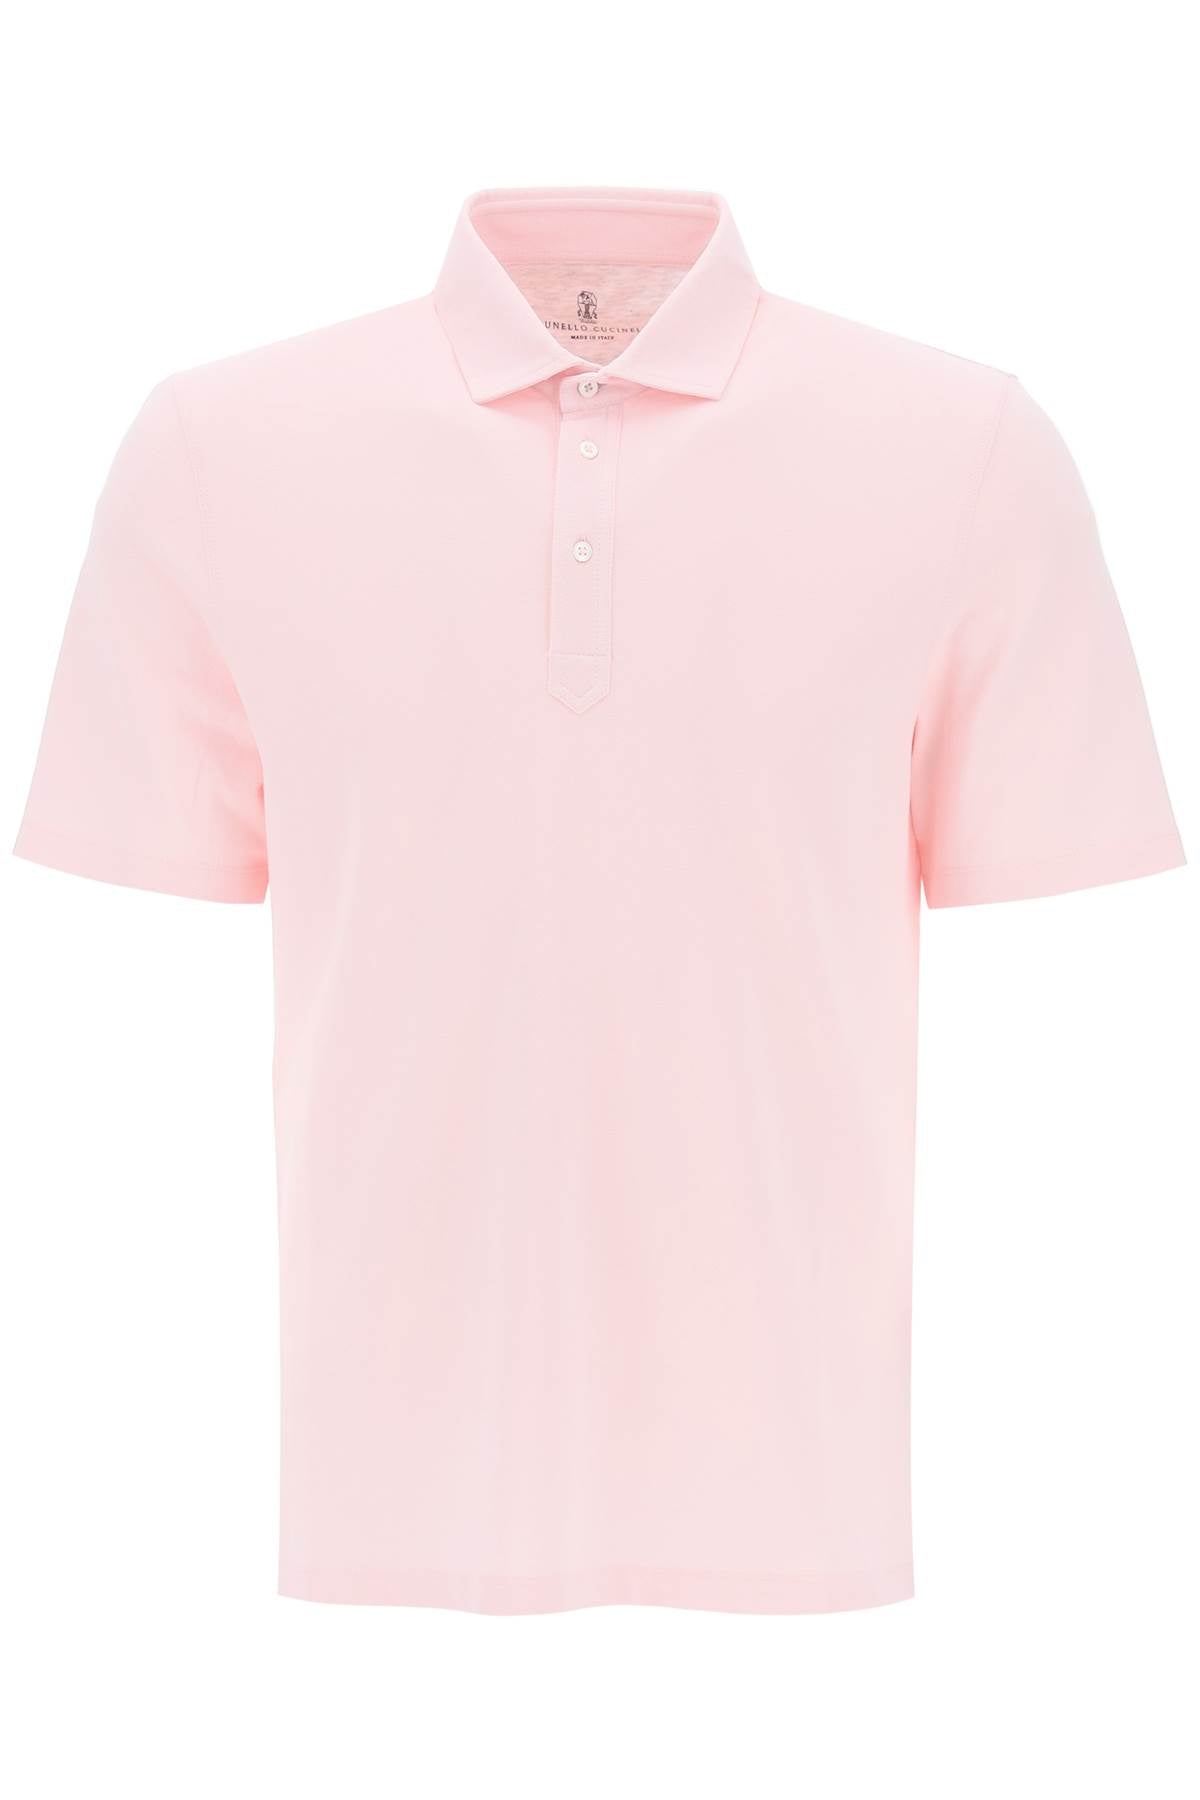 Brunello cucinelli polo shirt with french collar-men > clothing > t-shirts and sweatshirts > polos-Brunello Cucinelli-Urbanheer